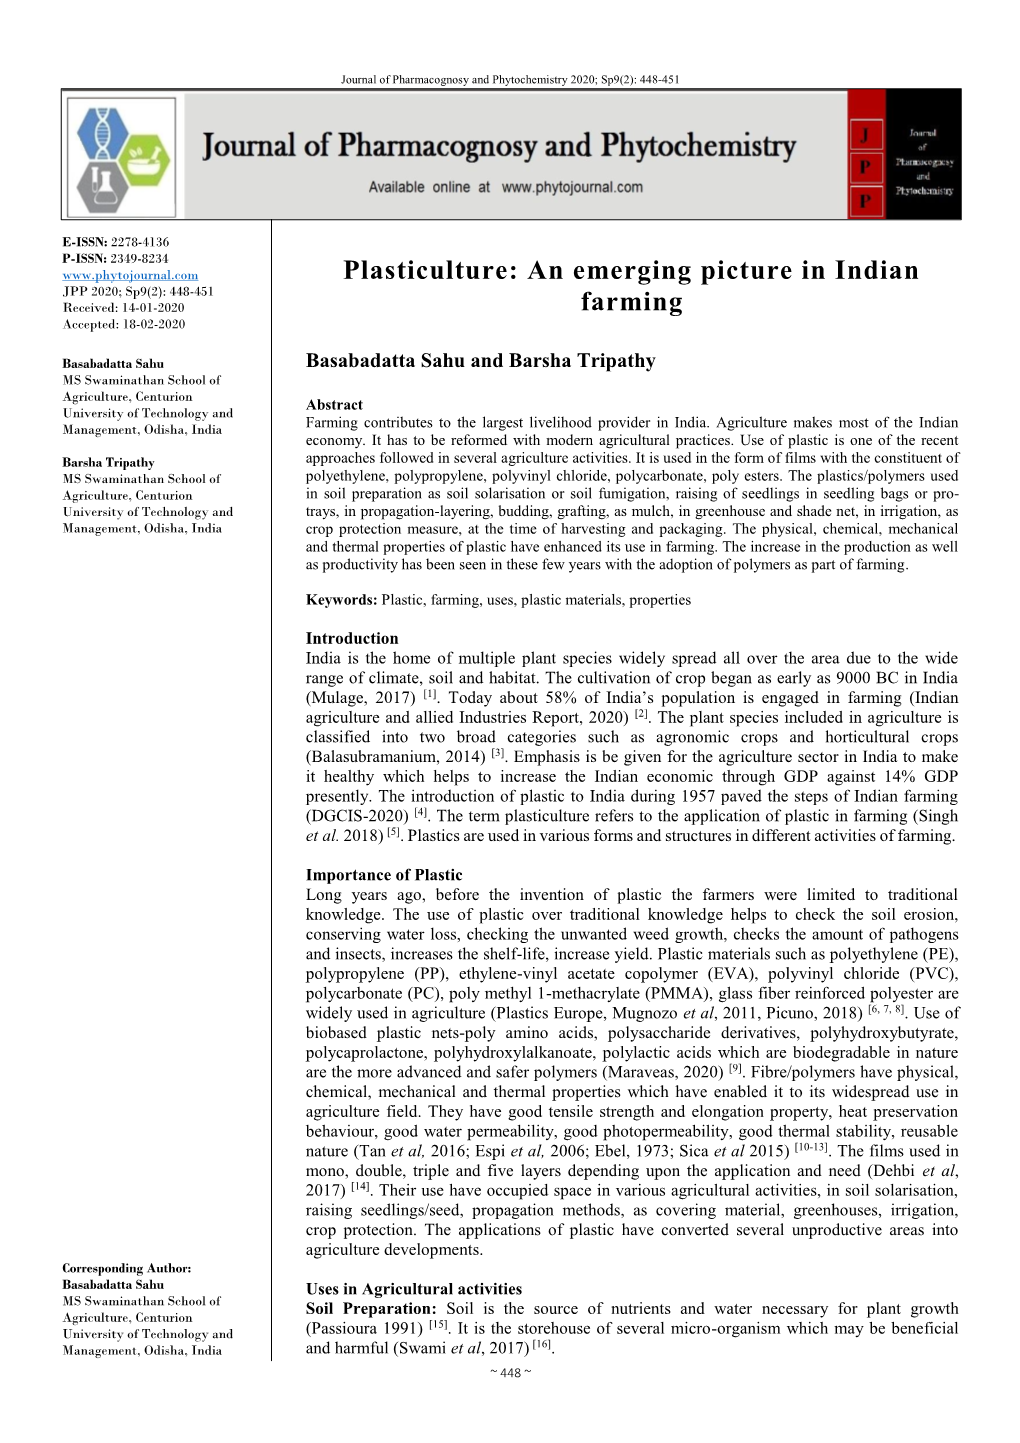 Plasticulture: an Emerging Picture in Indian Farming